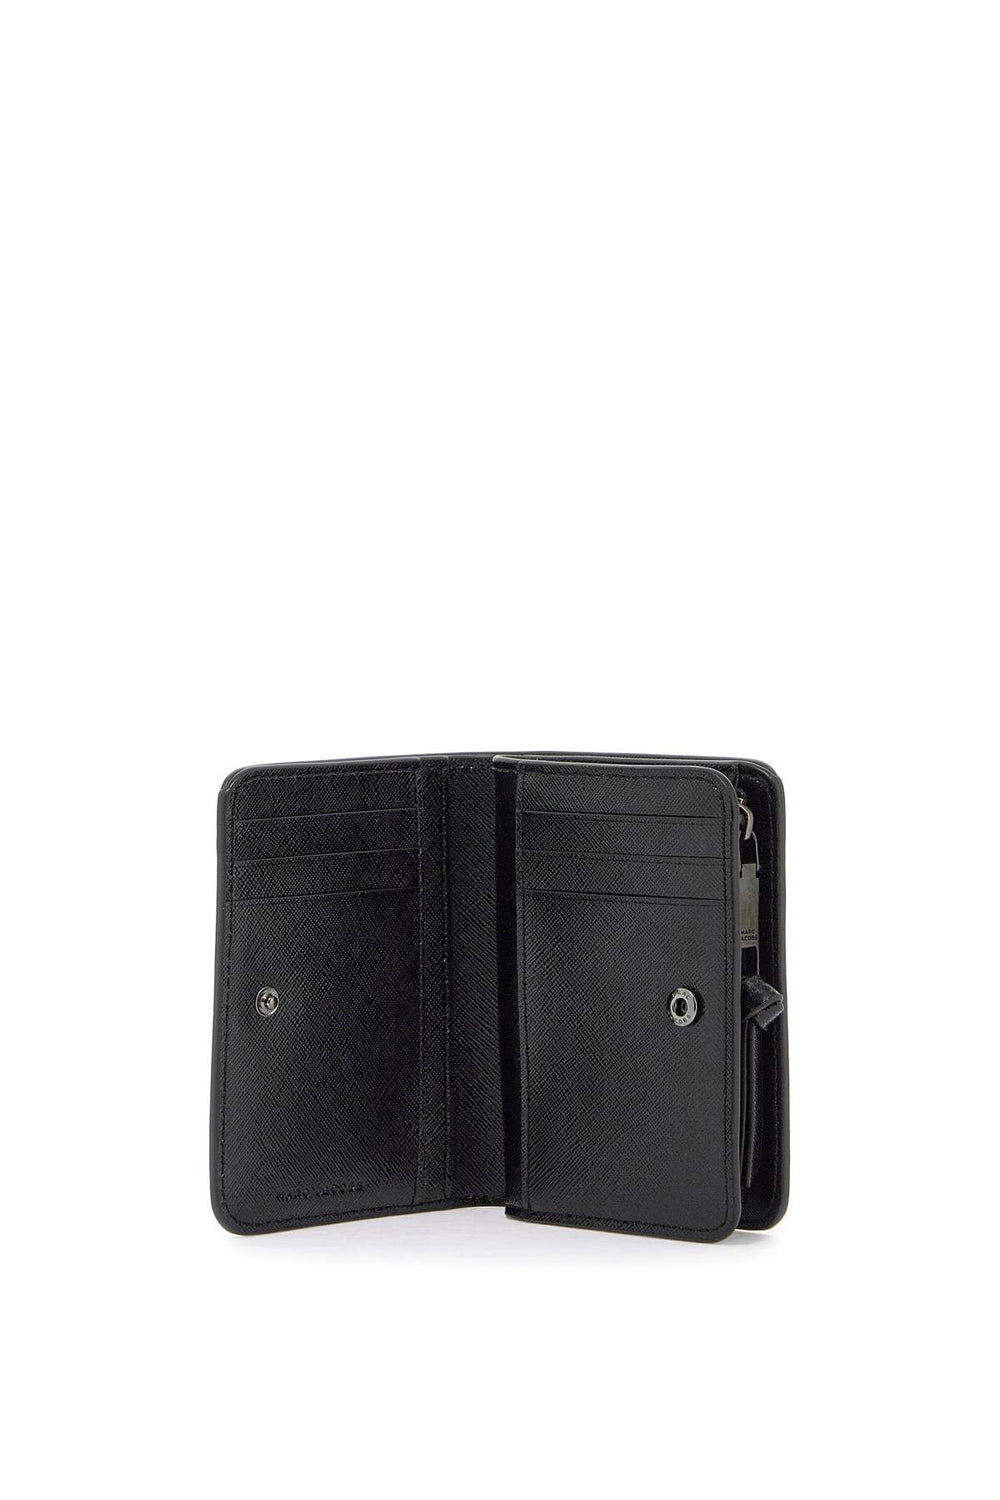 the utility snapshot mini compact wallet-1